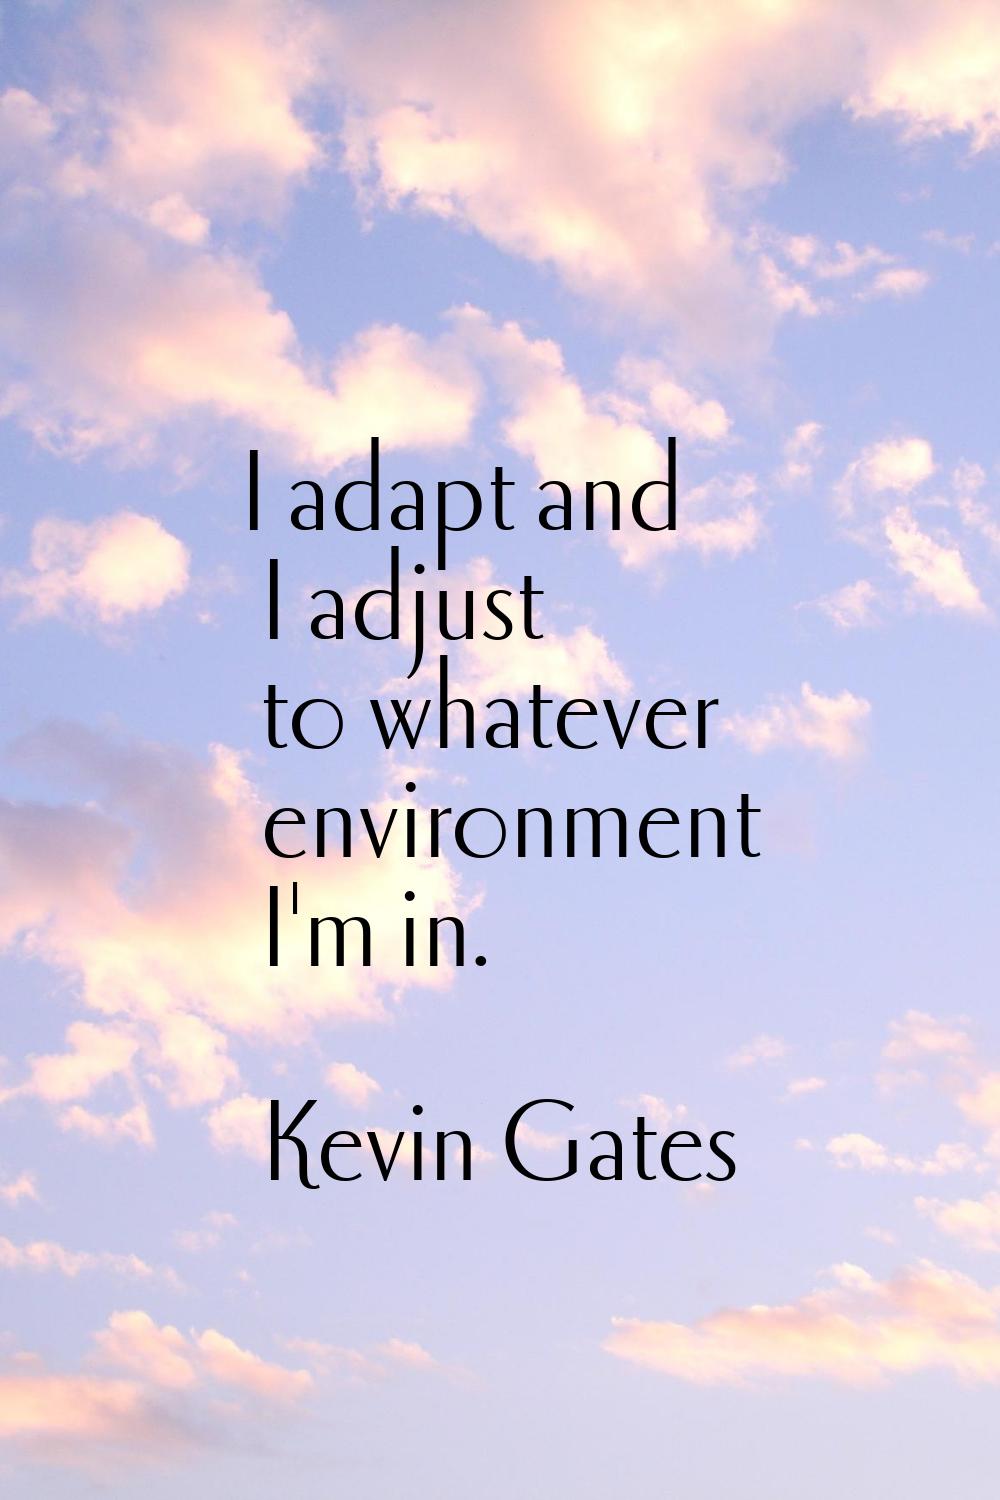 I adapt and I adjust to whatever environment I'm in.